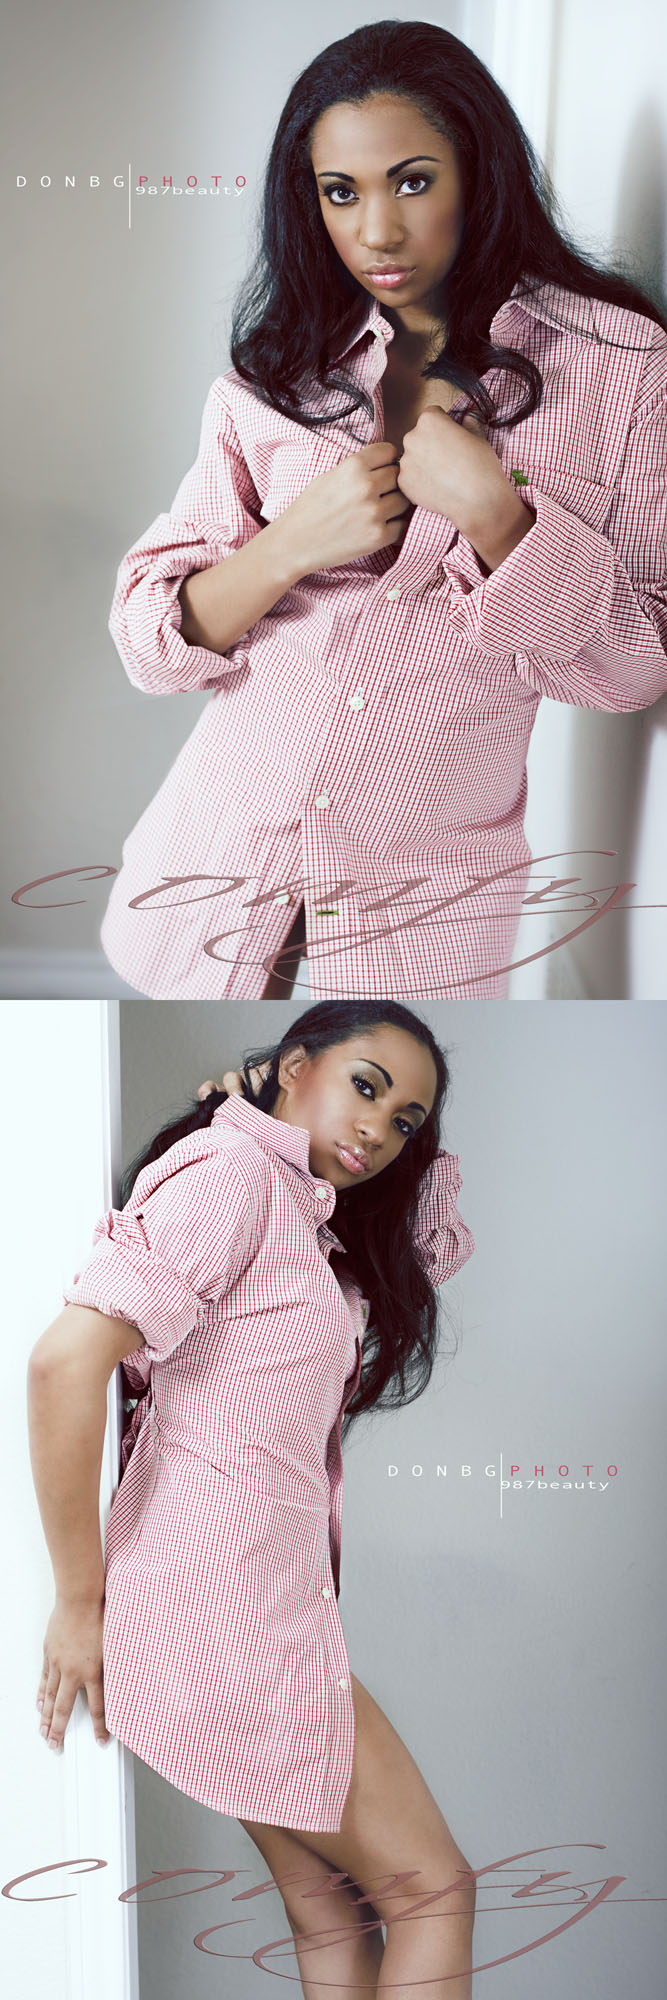 Female model photo shoot of CreoleMix by DONBG in texas, makeup by 987Beauty